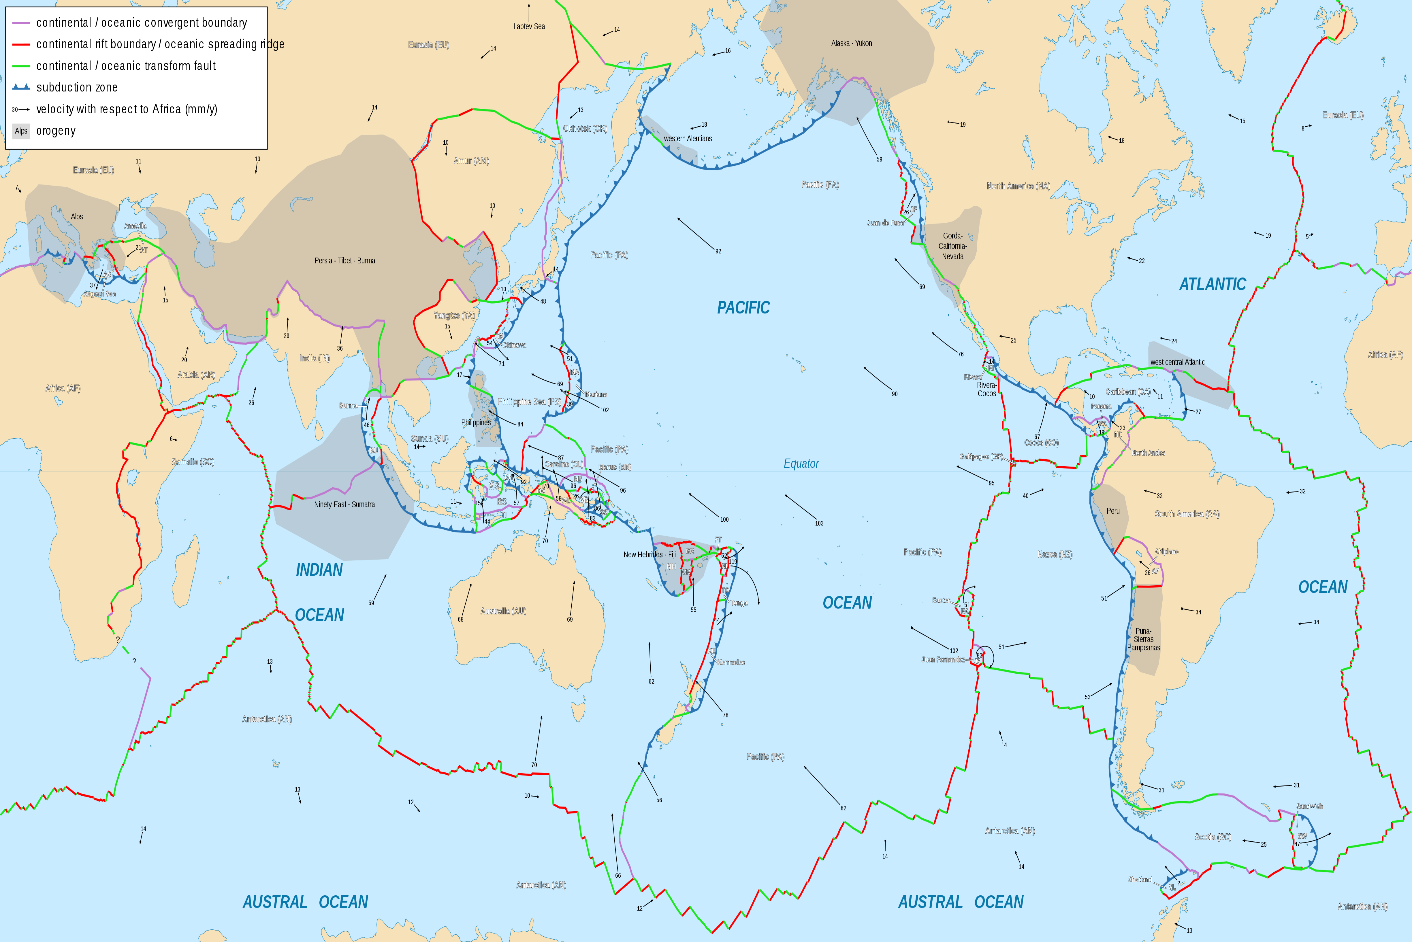 Global tectonic plates map. What to do during an earthquake?